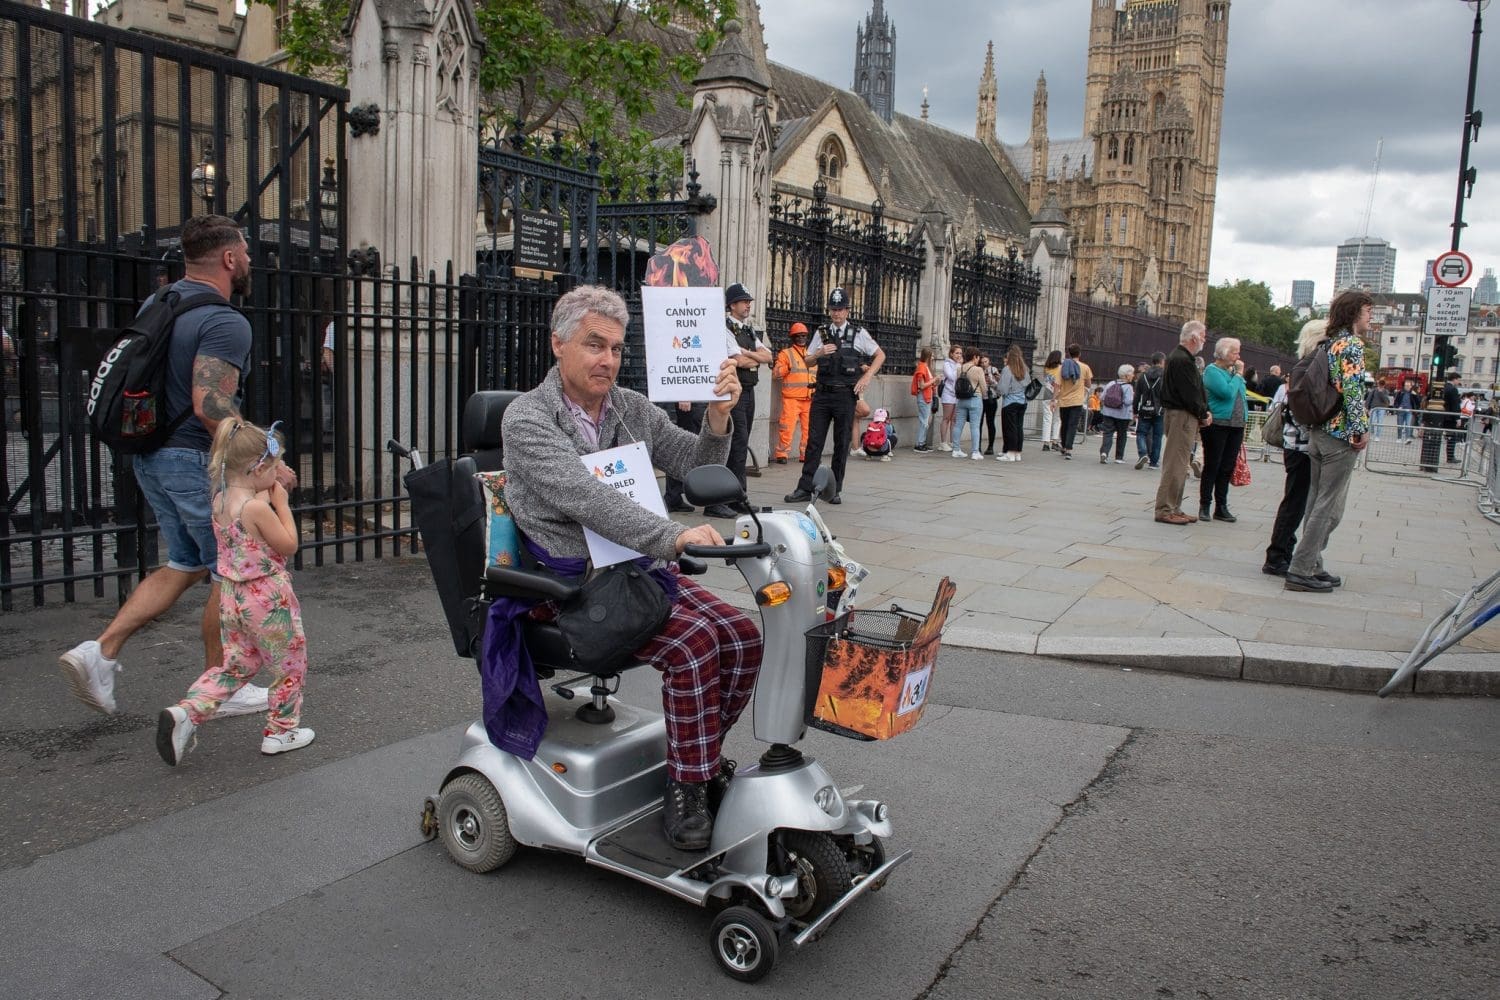 Neil Goodwin, a disabled man, protesting outside parliament in his mobility scooter